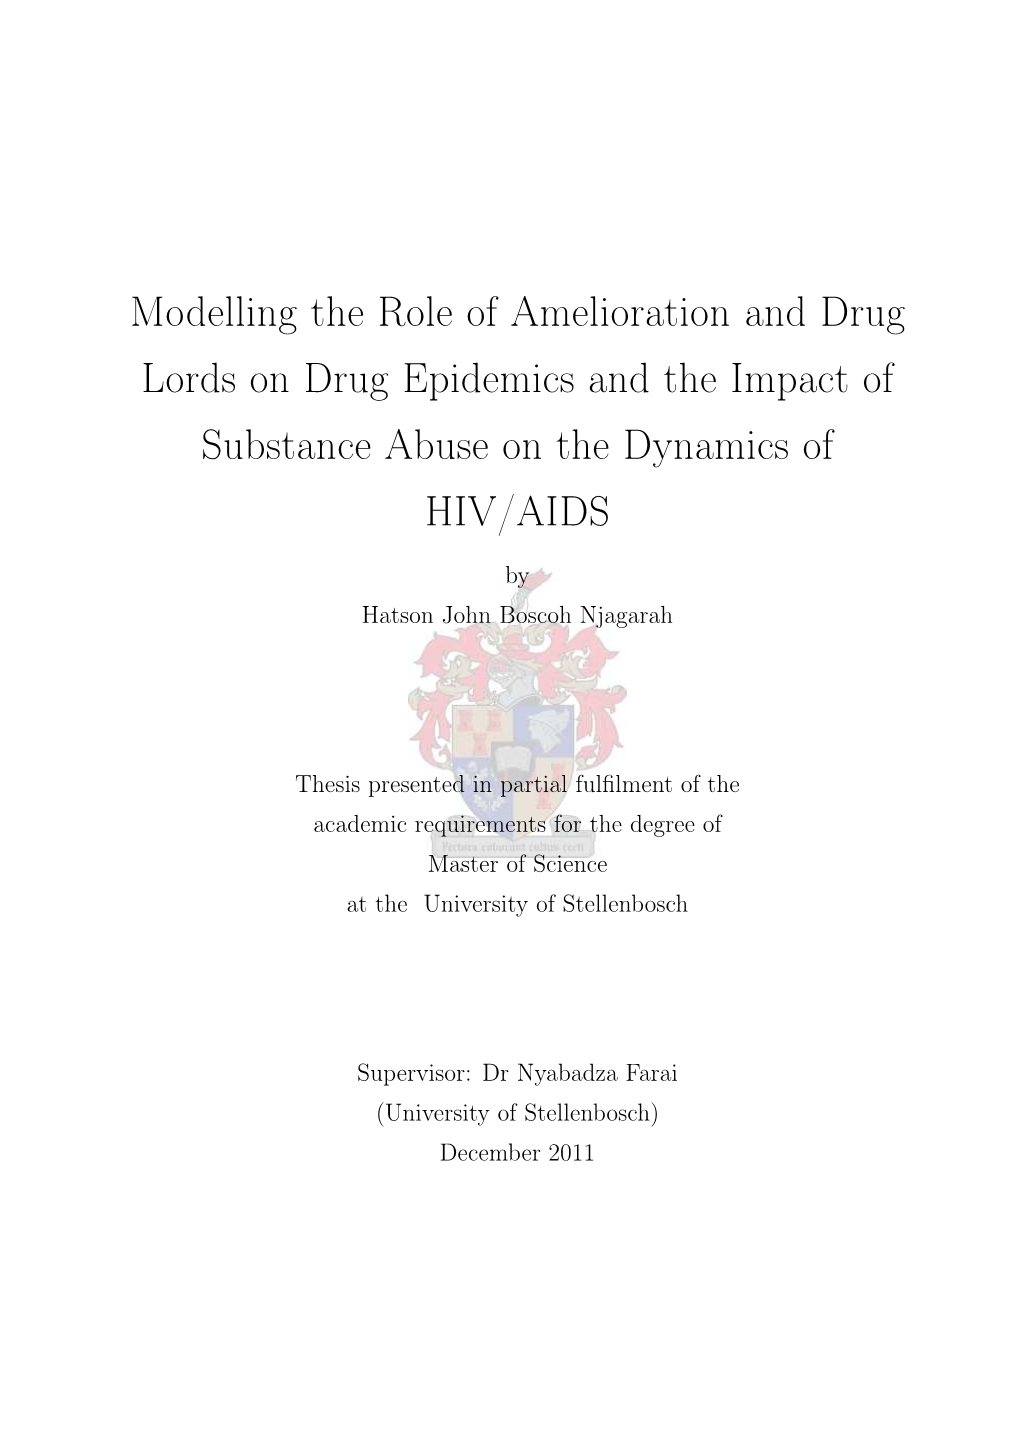 Modelling the Role of Amelioration and Drug Lords on Drug Epidemics and the Impact of Substance Abuse on the Dynamics of HIV/AIDS